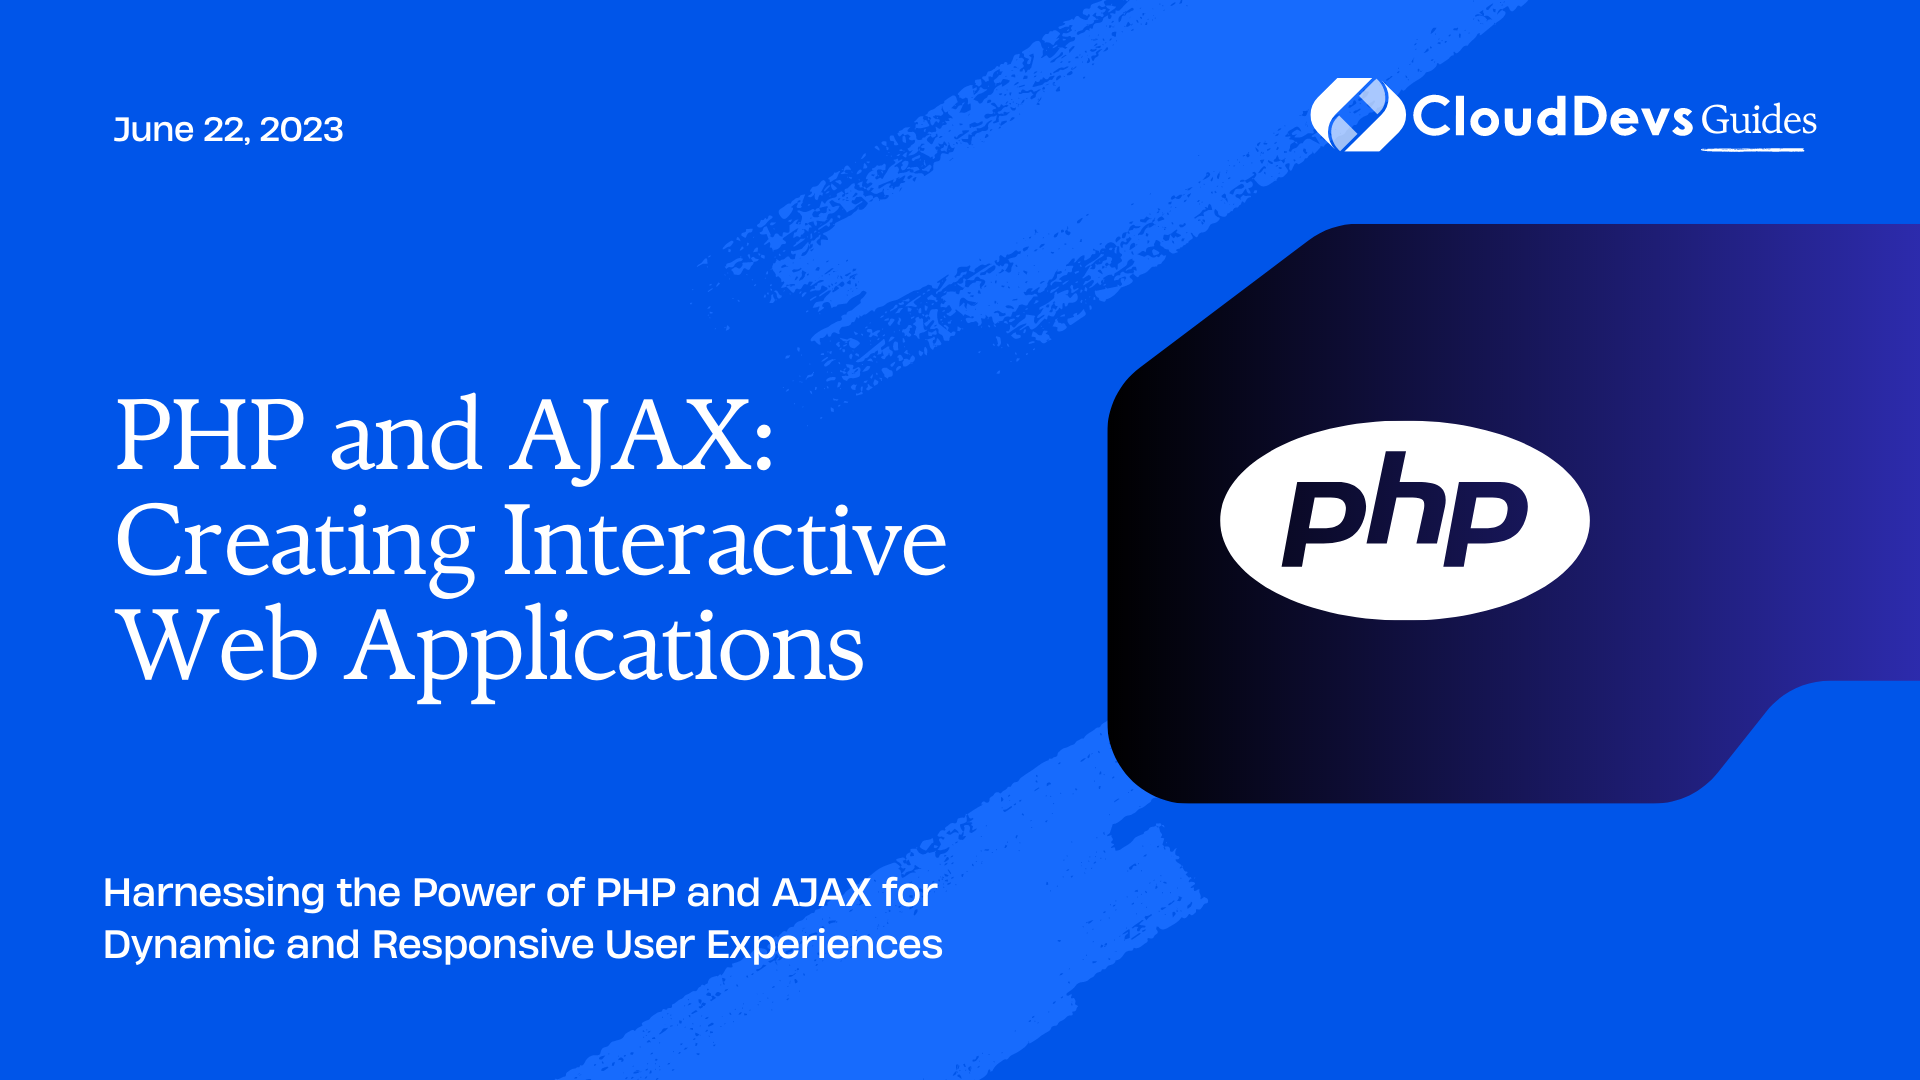 PHP and AJAX: Creating Interactive Web Applications